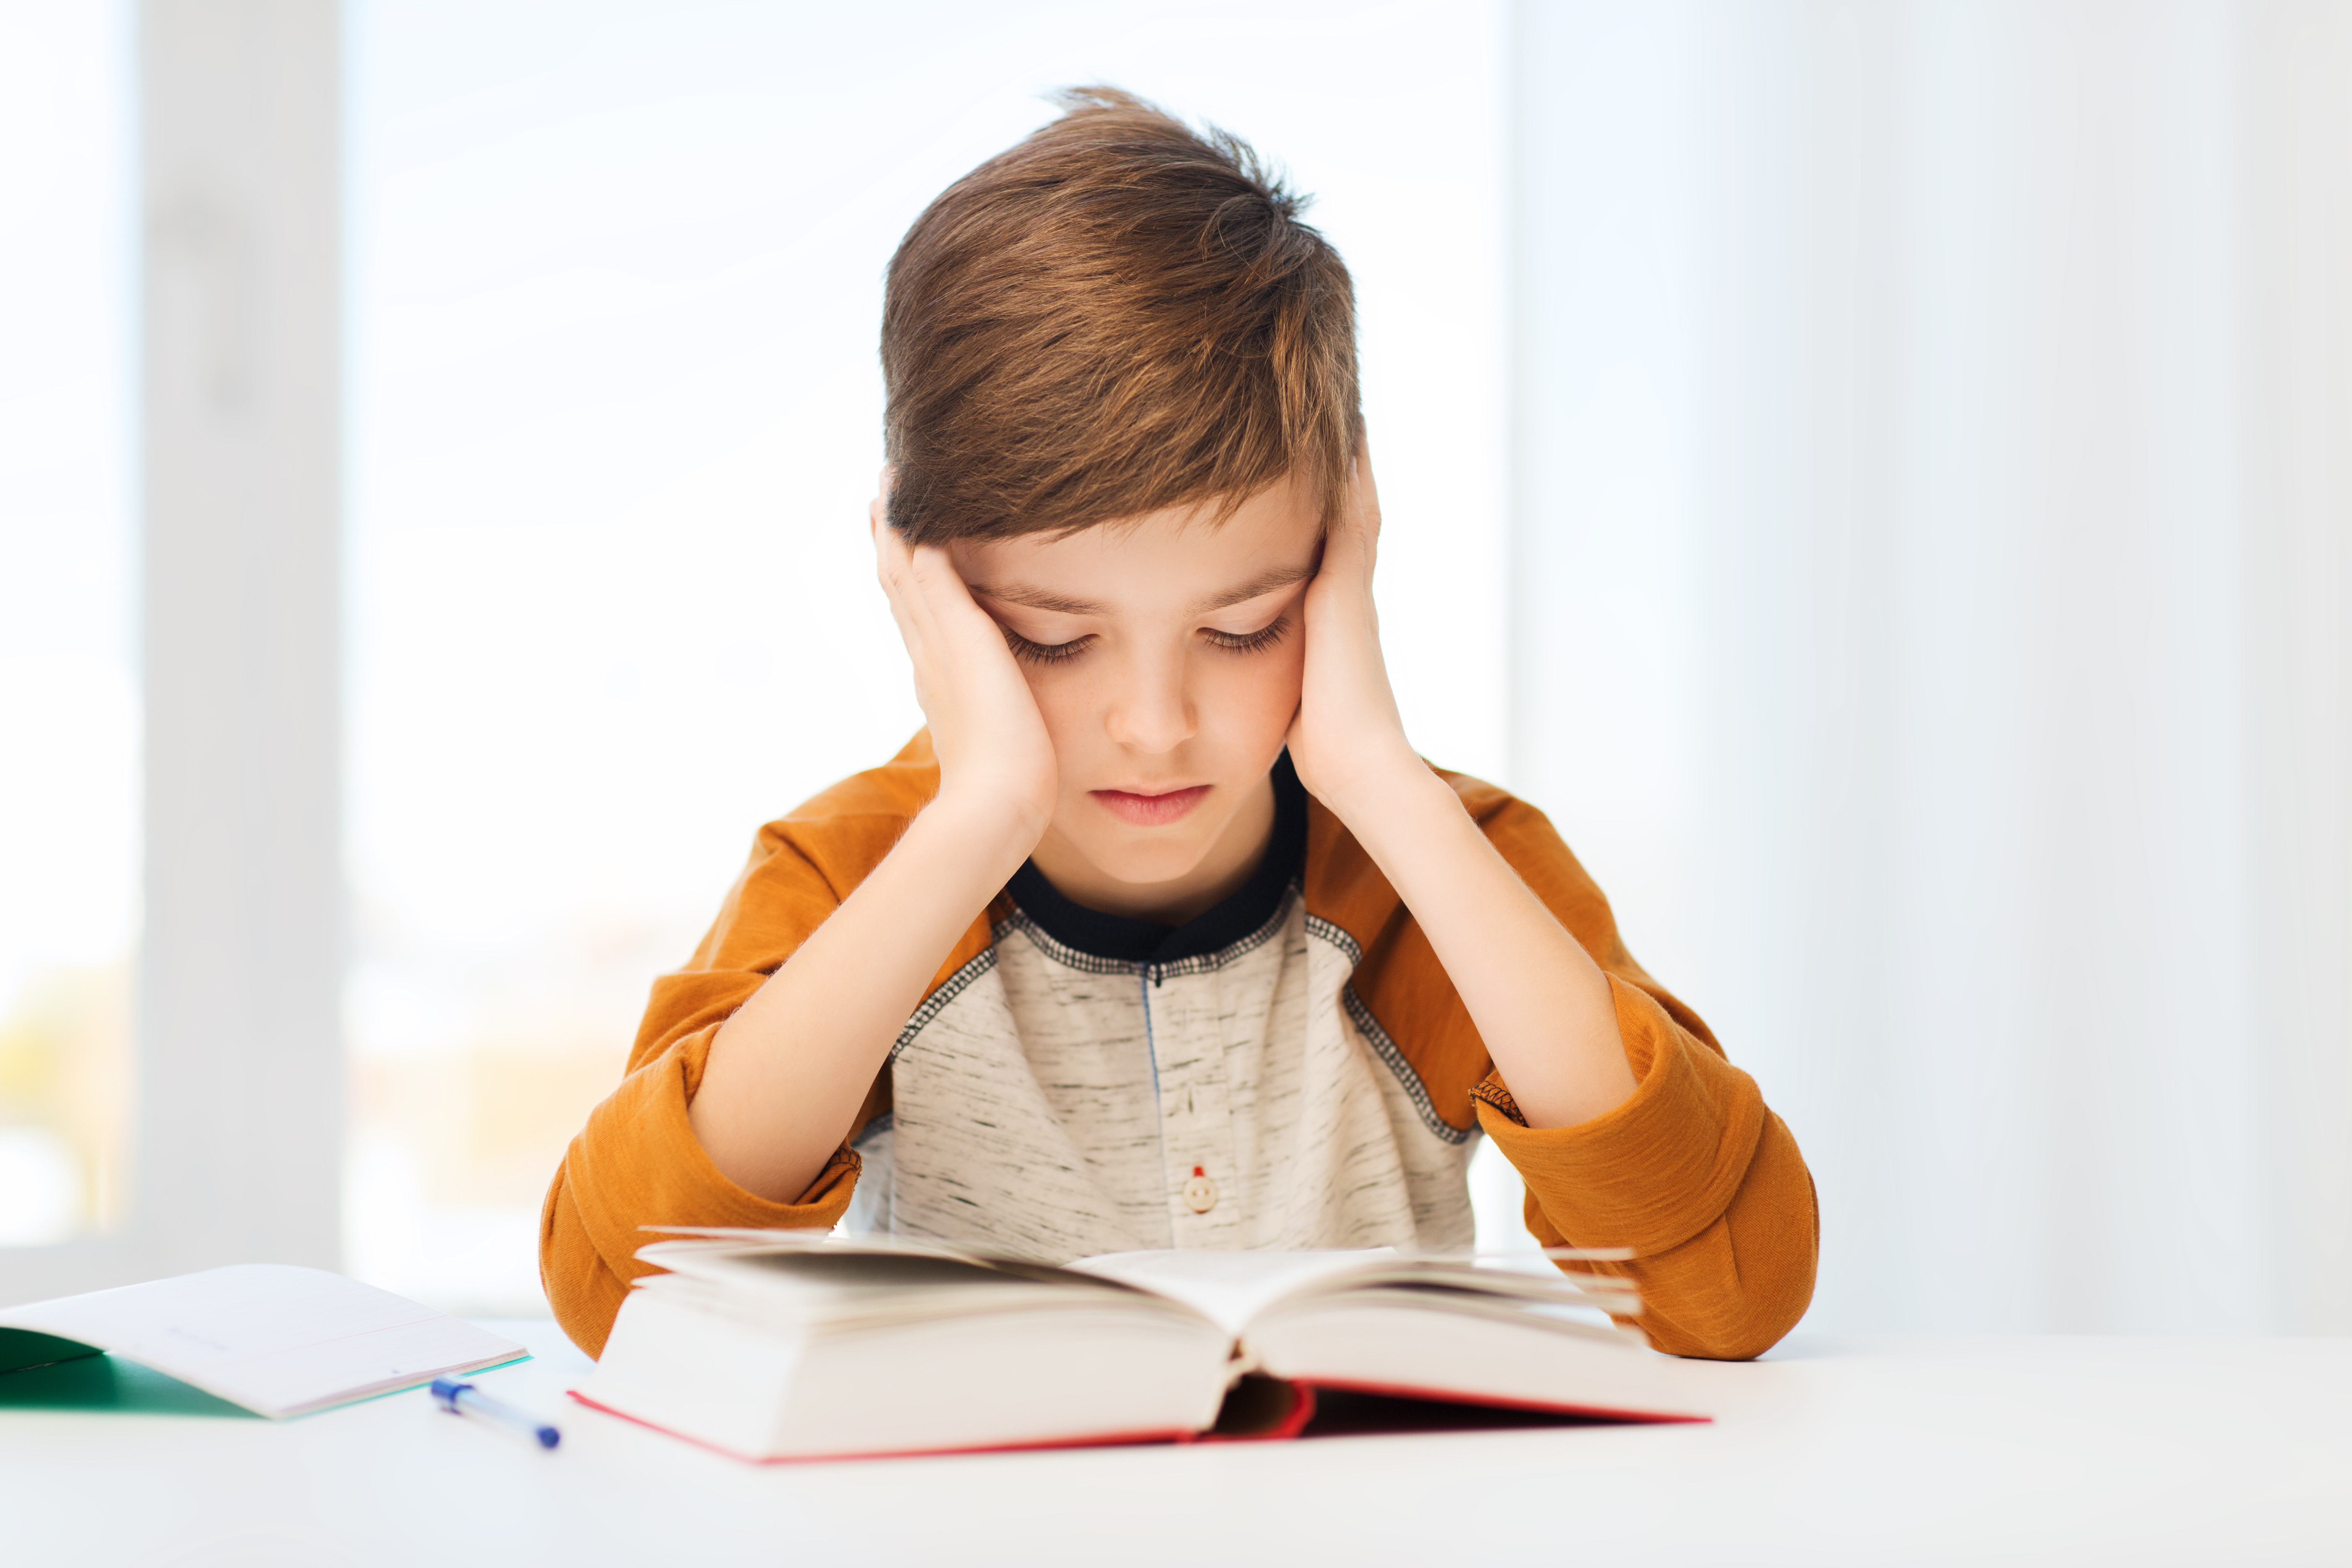 How to help add child focus on homework